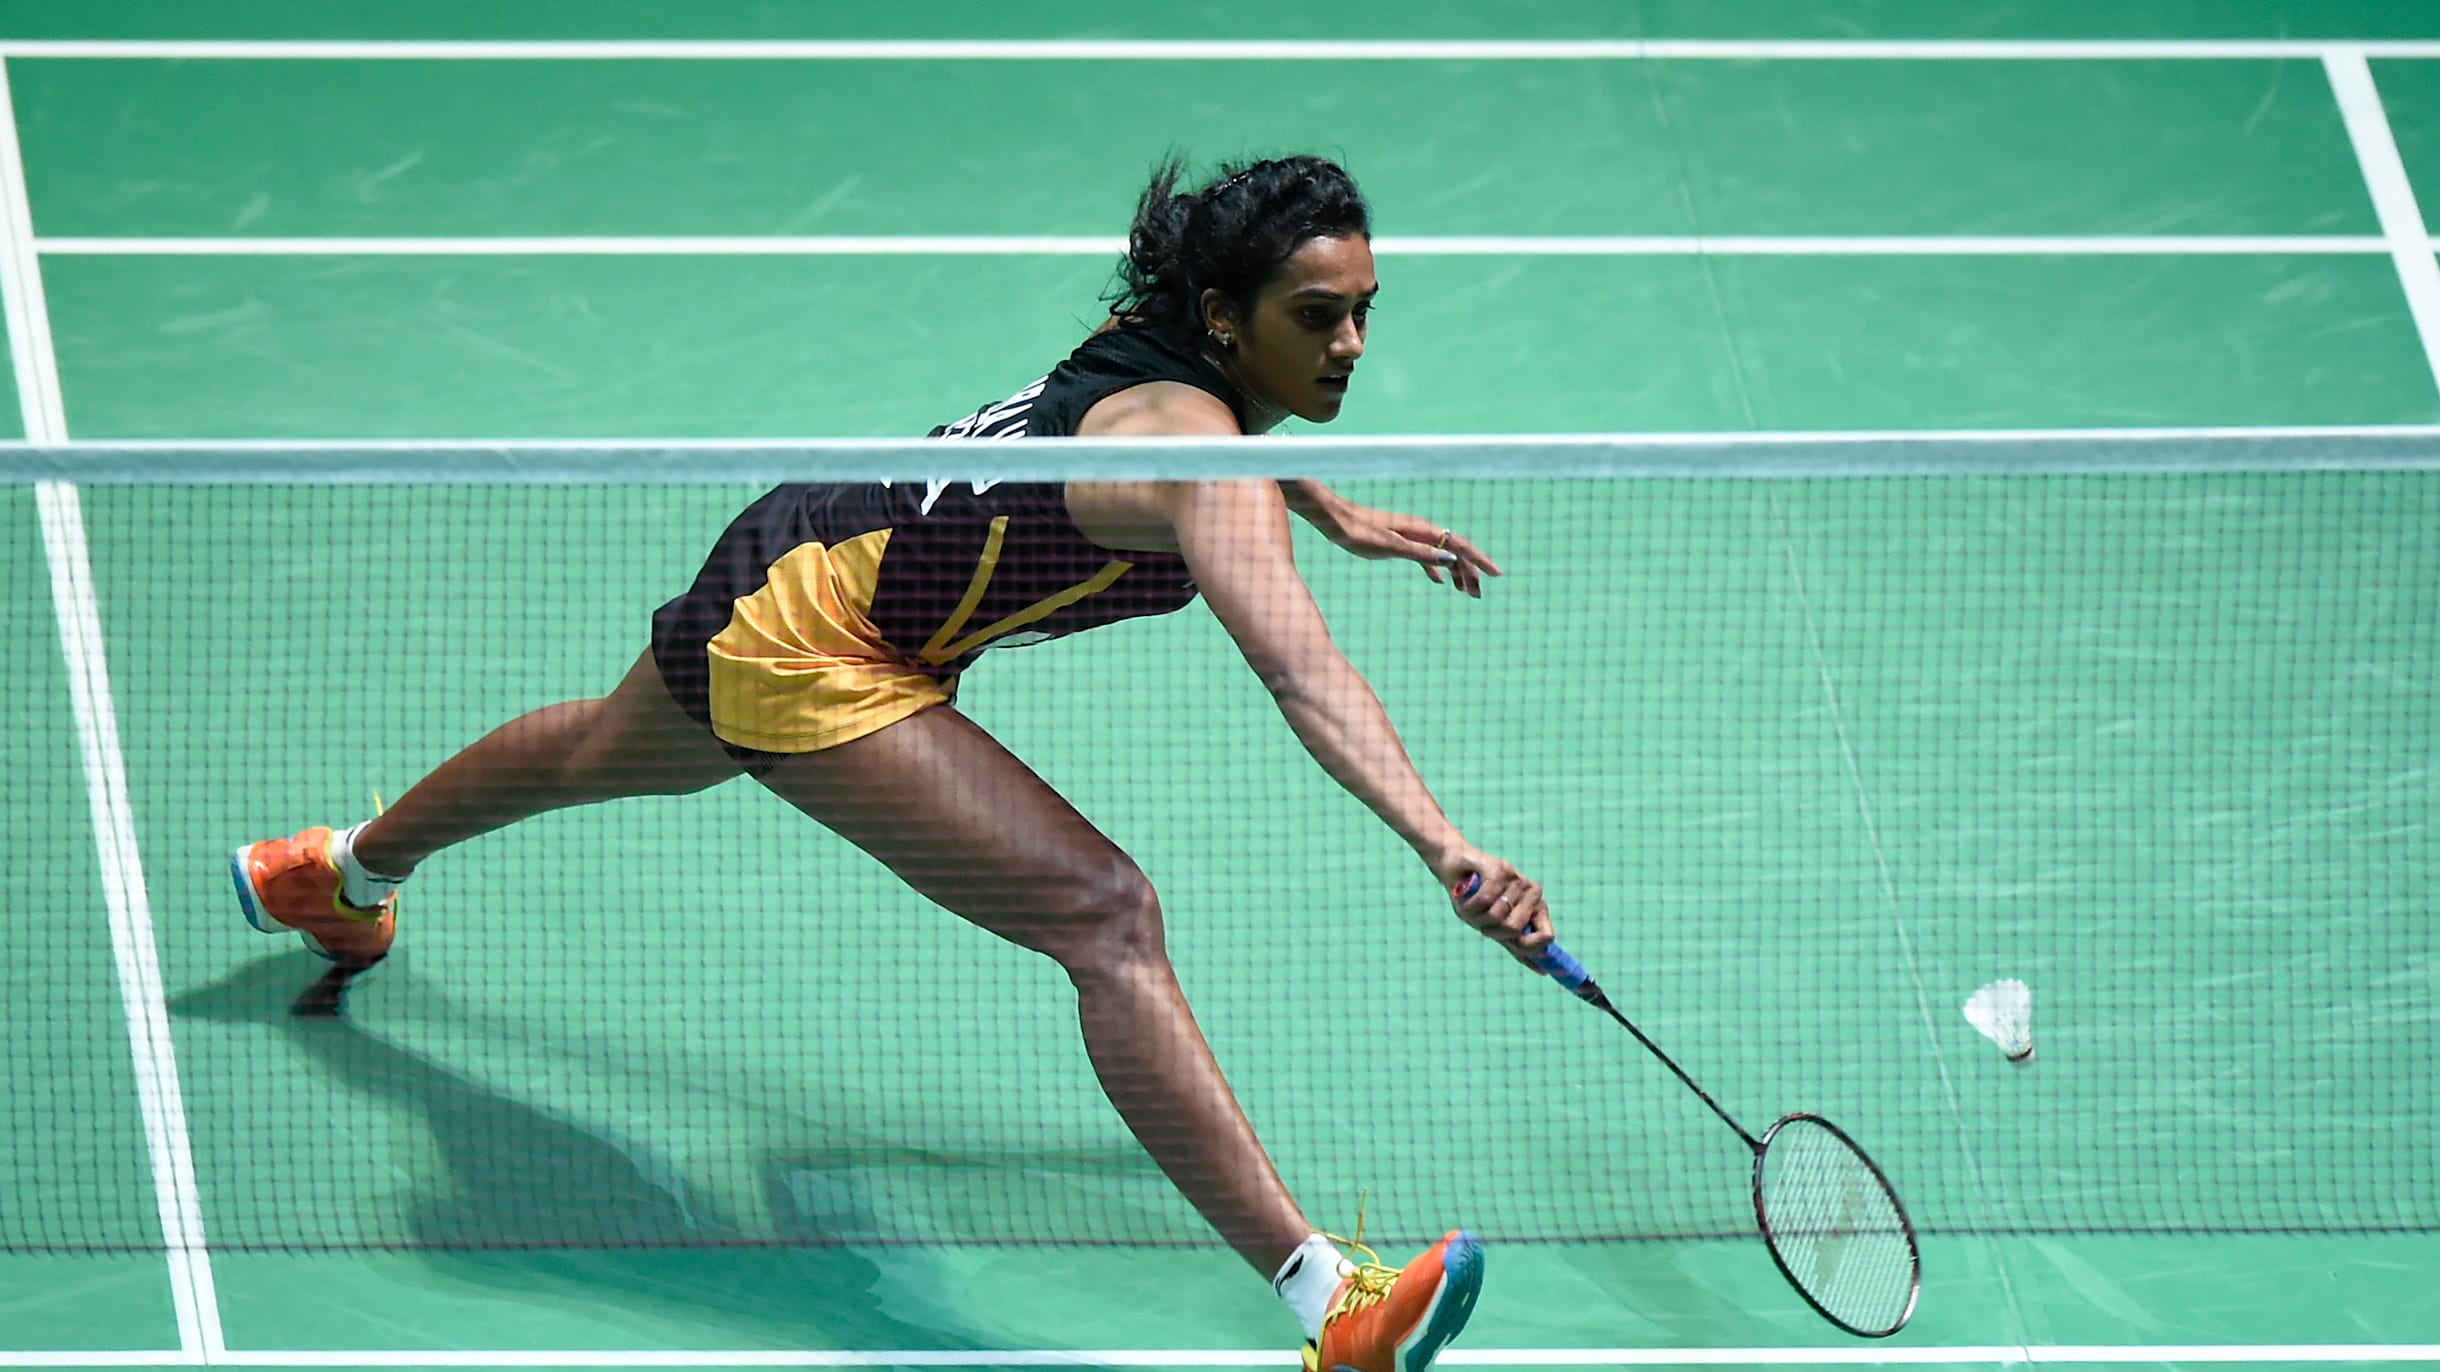 Swiss Open 2022 badminton PV Sindhu, Saina Nehwal to be in action; watch live in India